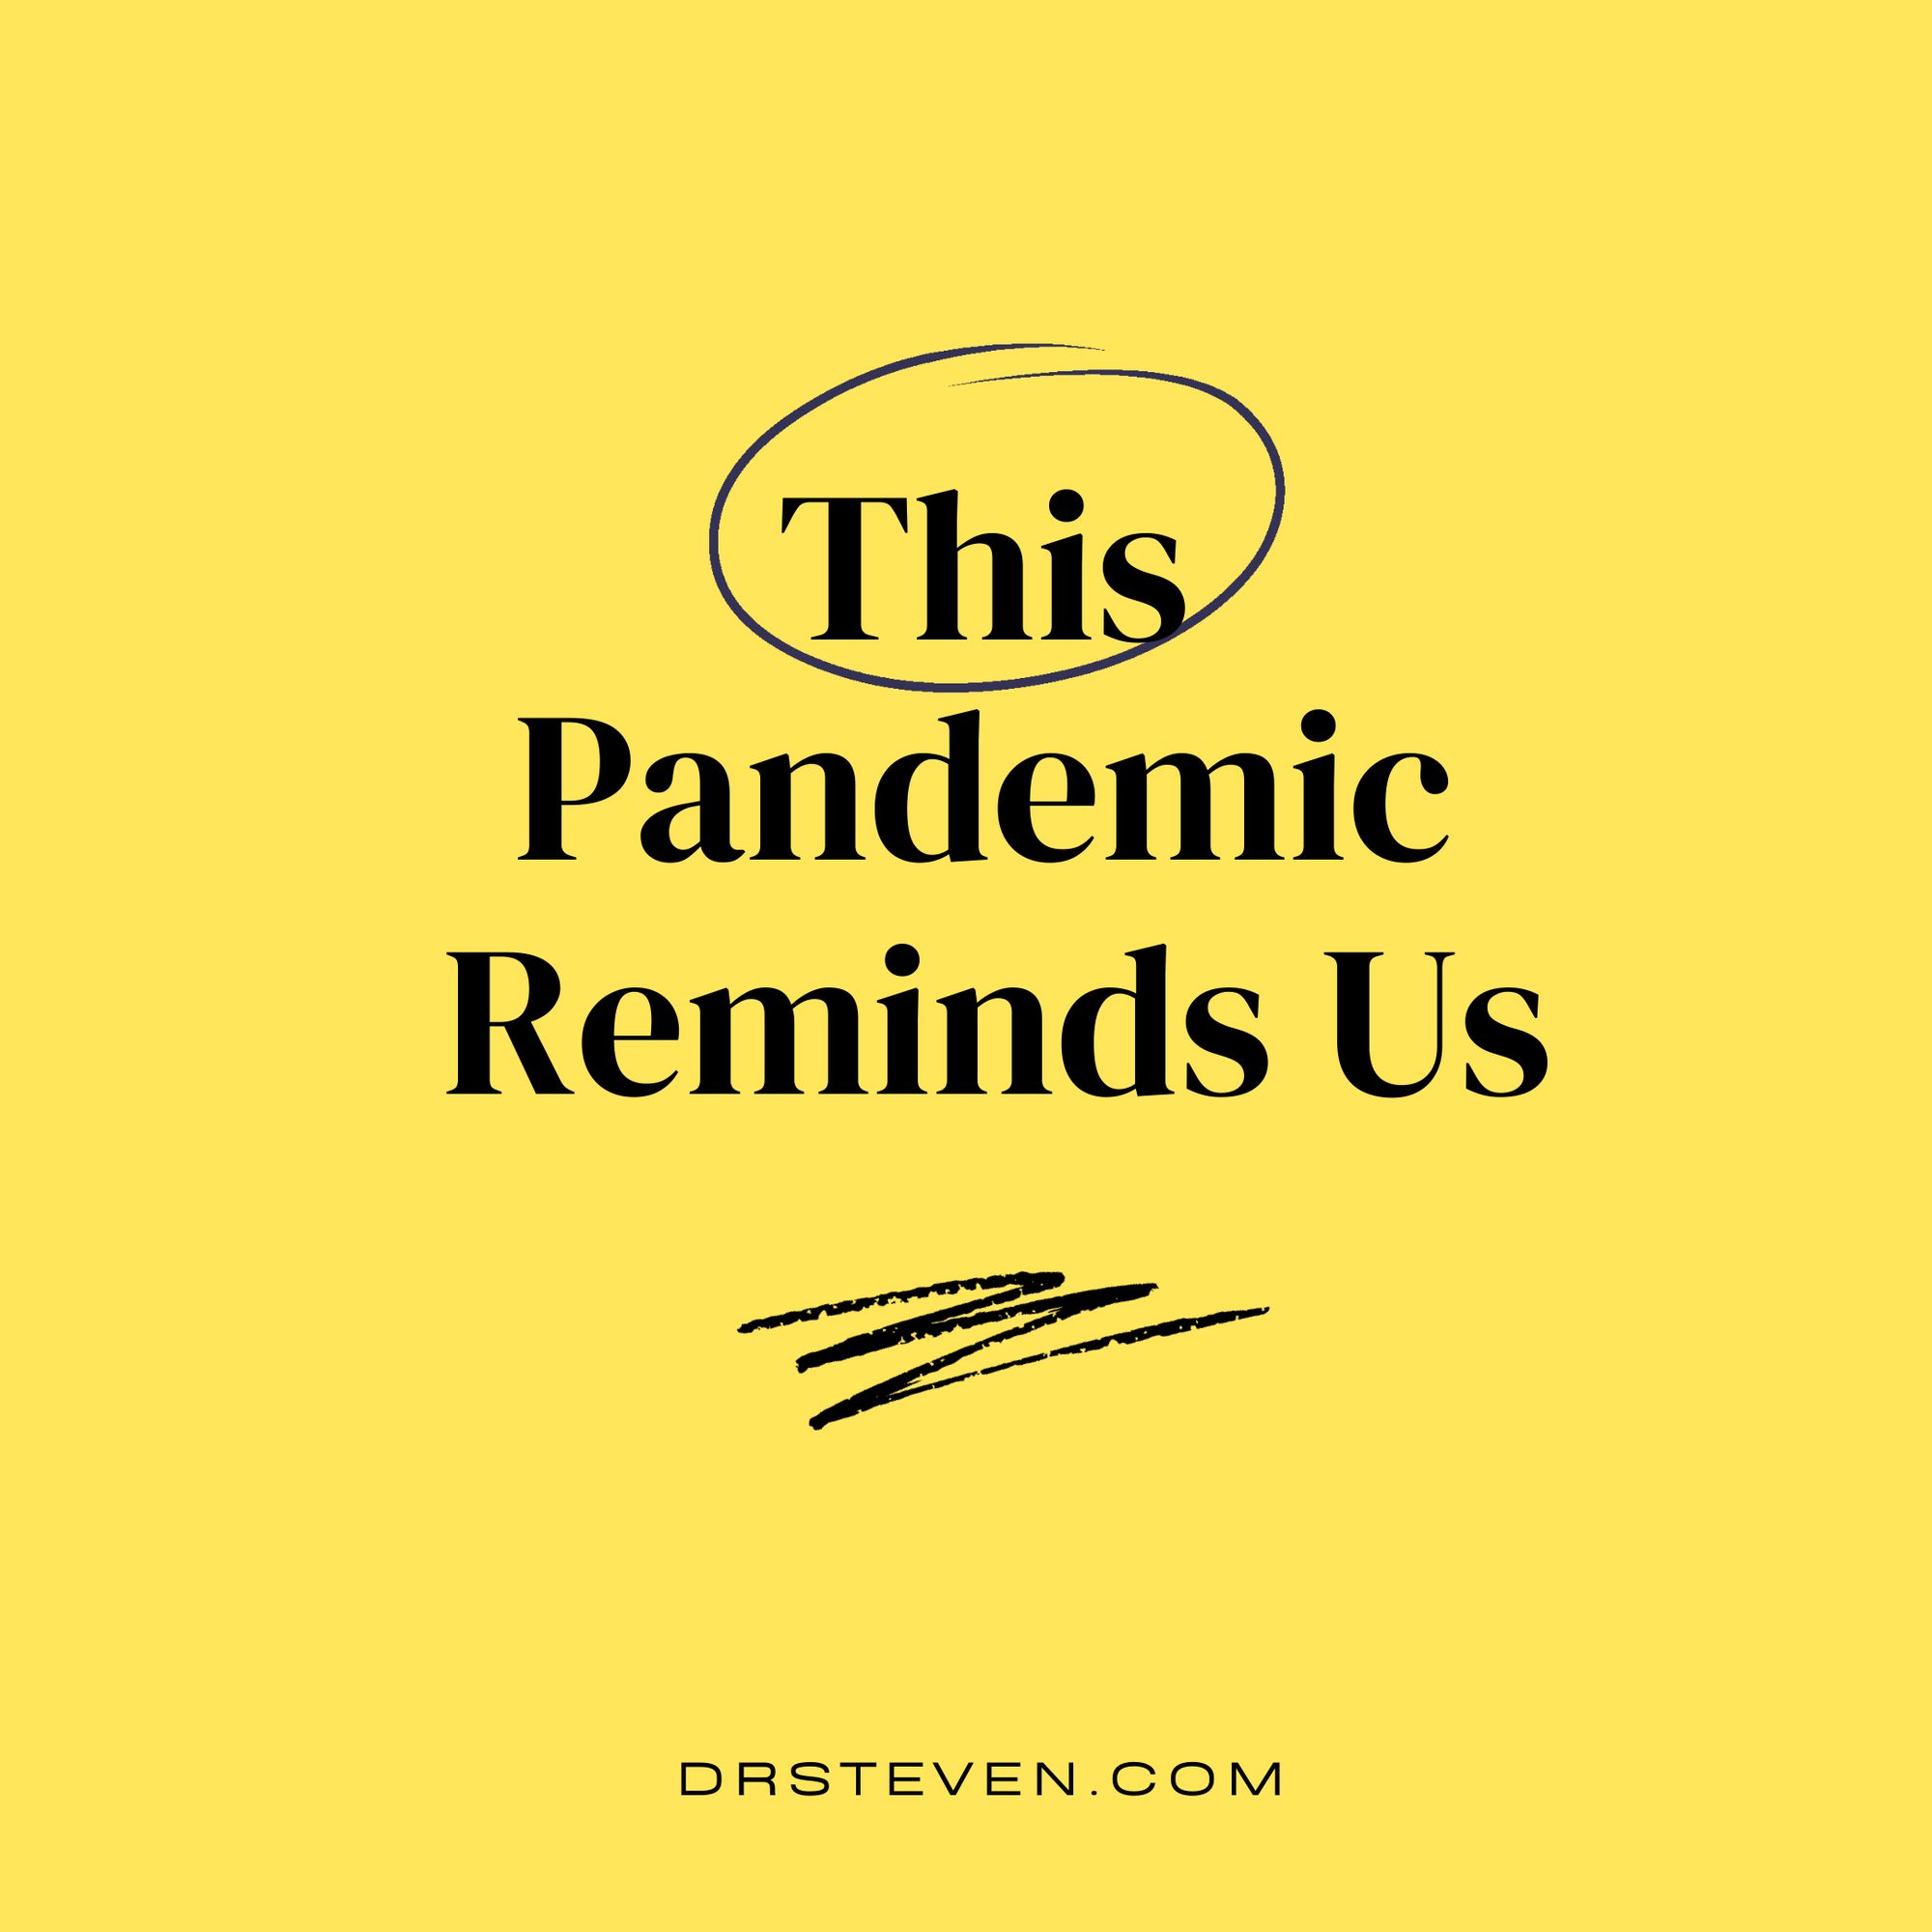 This Pandemic Reminds Us